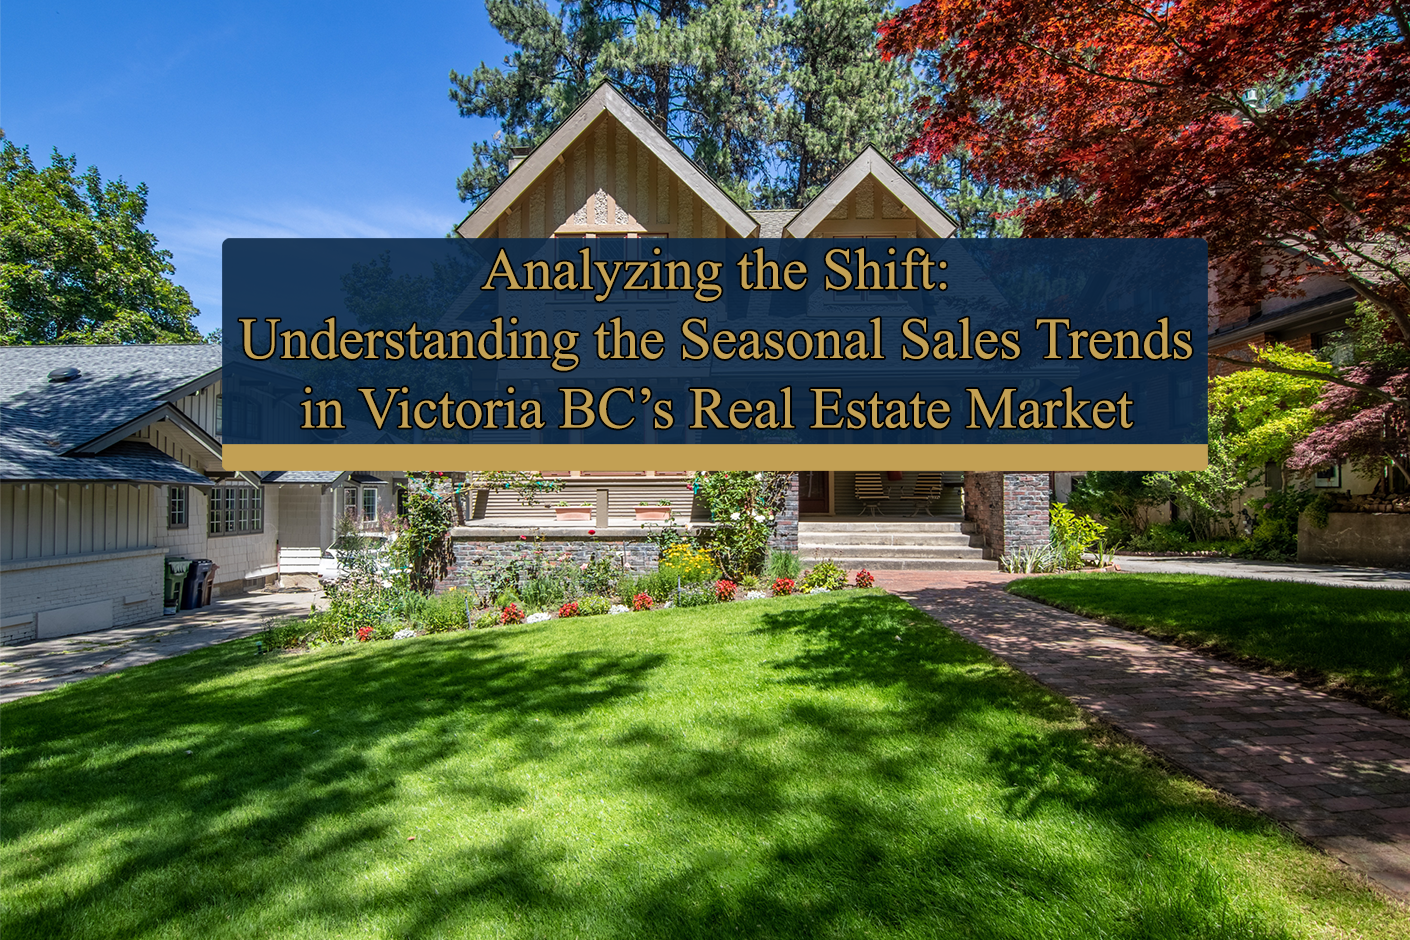 Analyzing the Shift: Understanding Seasonal Sales Trends in Victoria BC's Real Estate Market